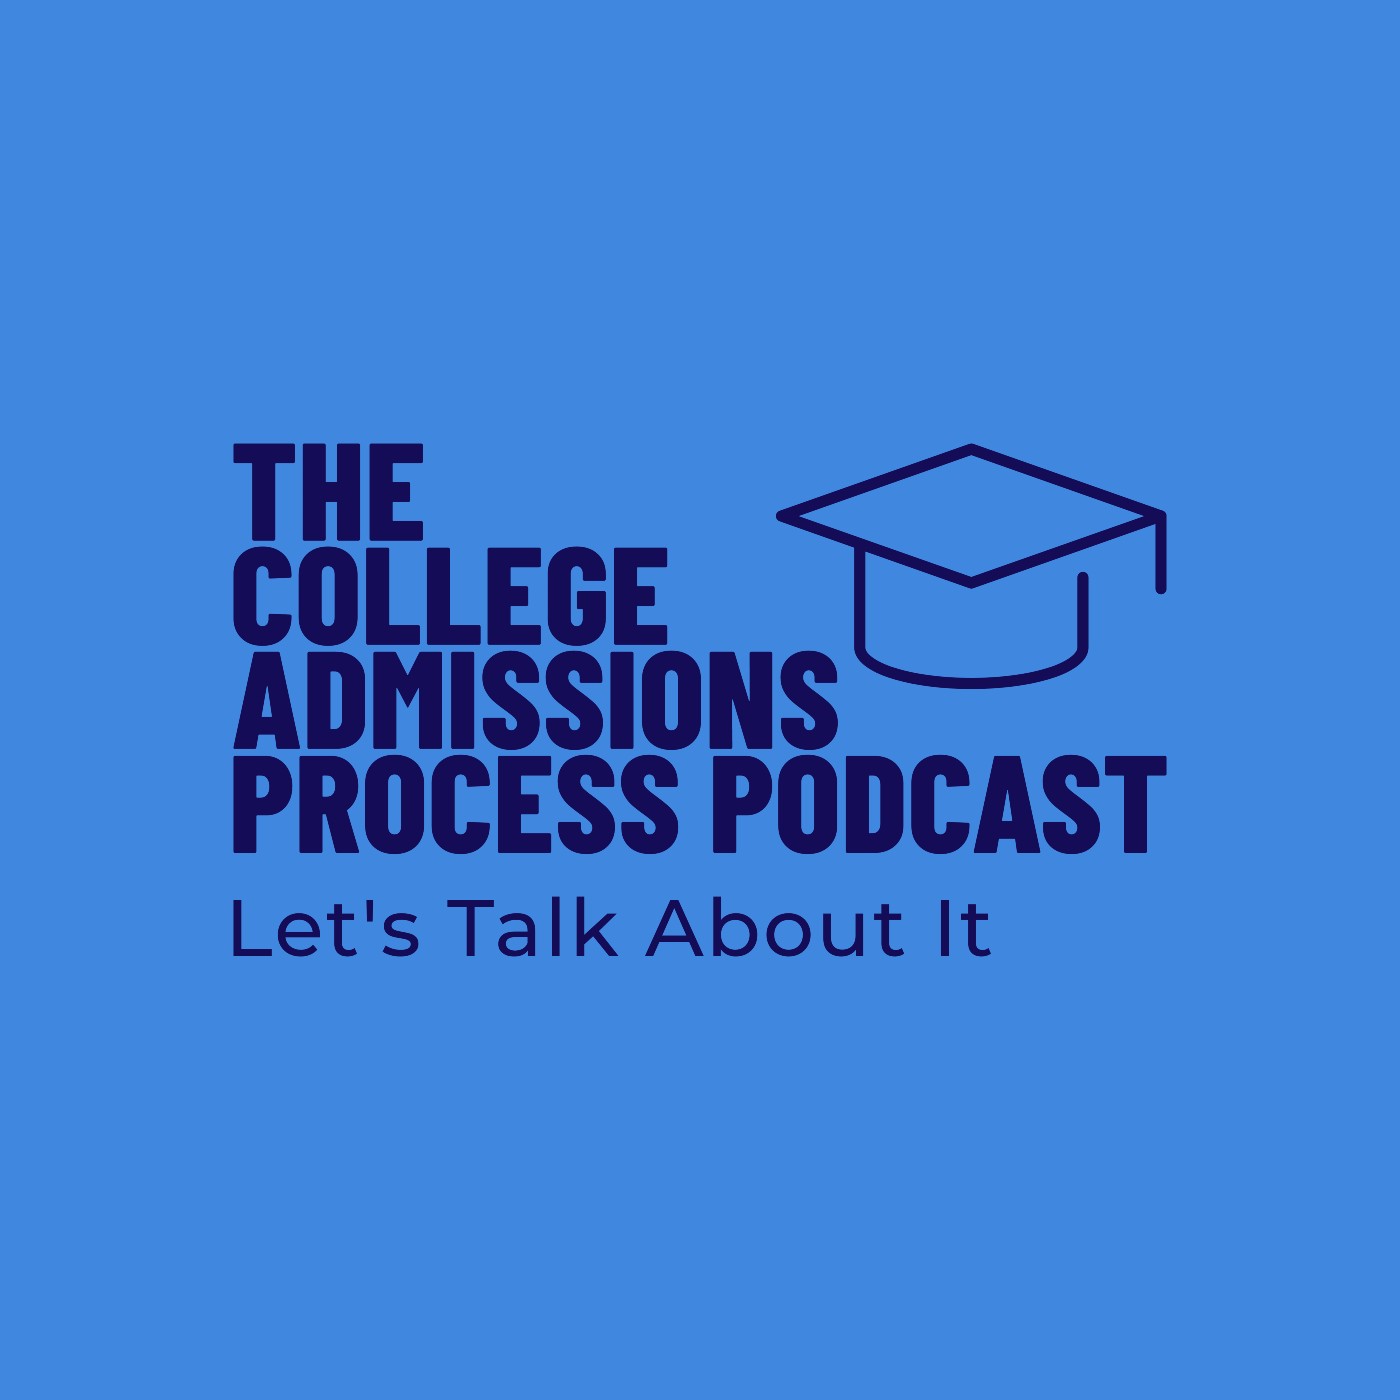 The College Admissions Process Podcast screenshot